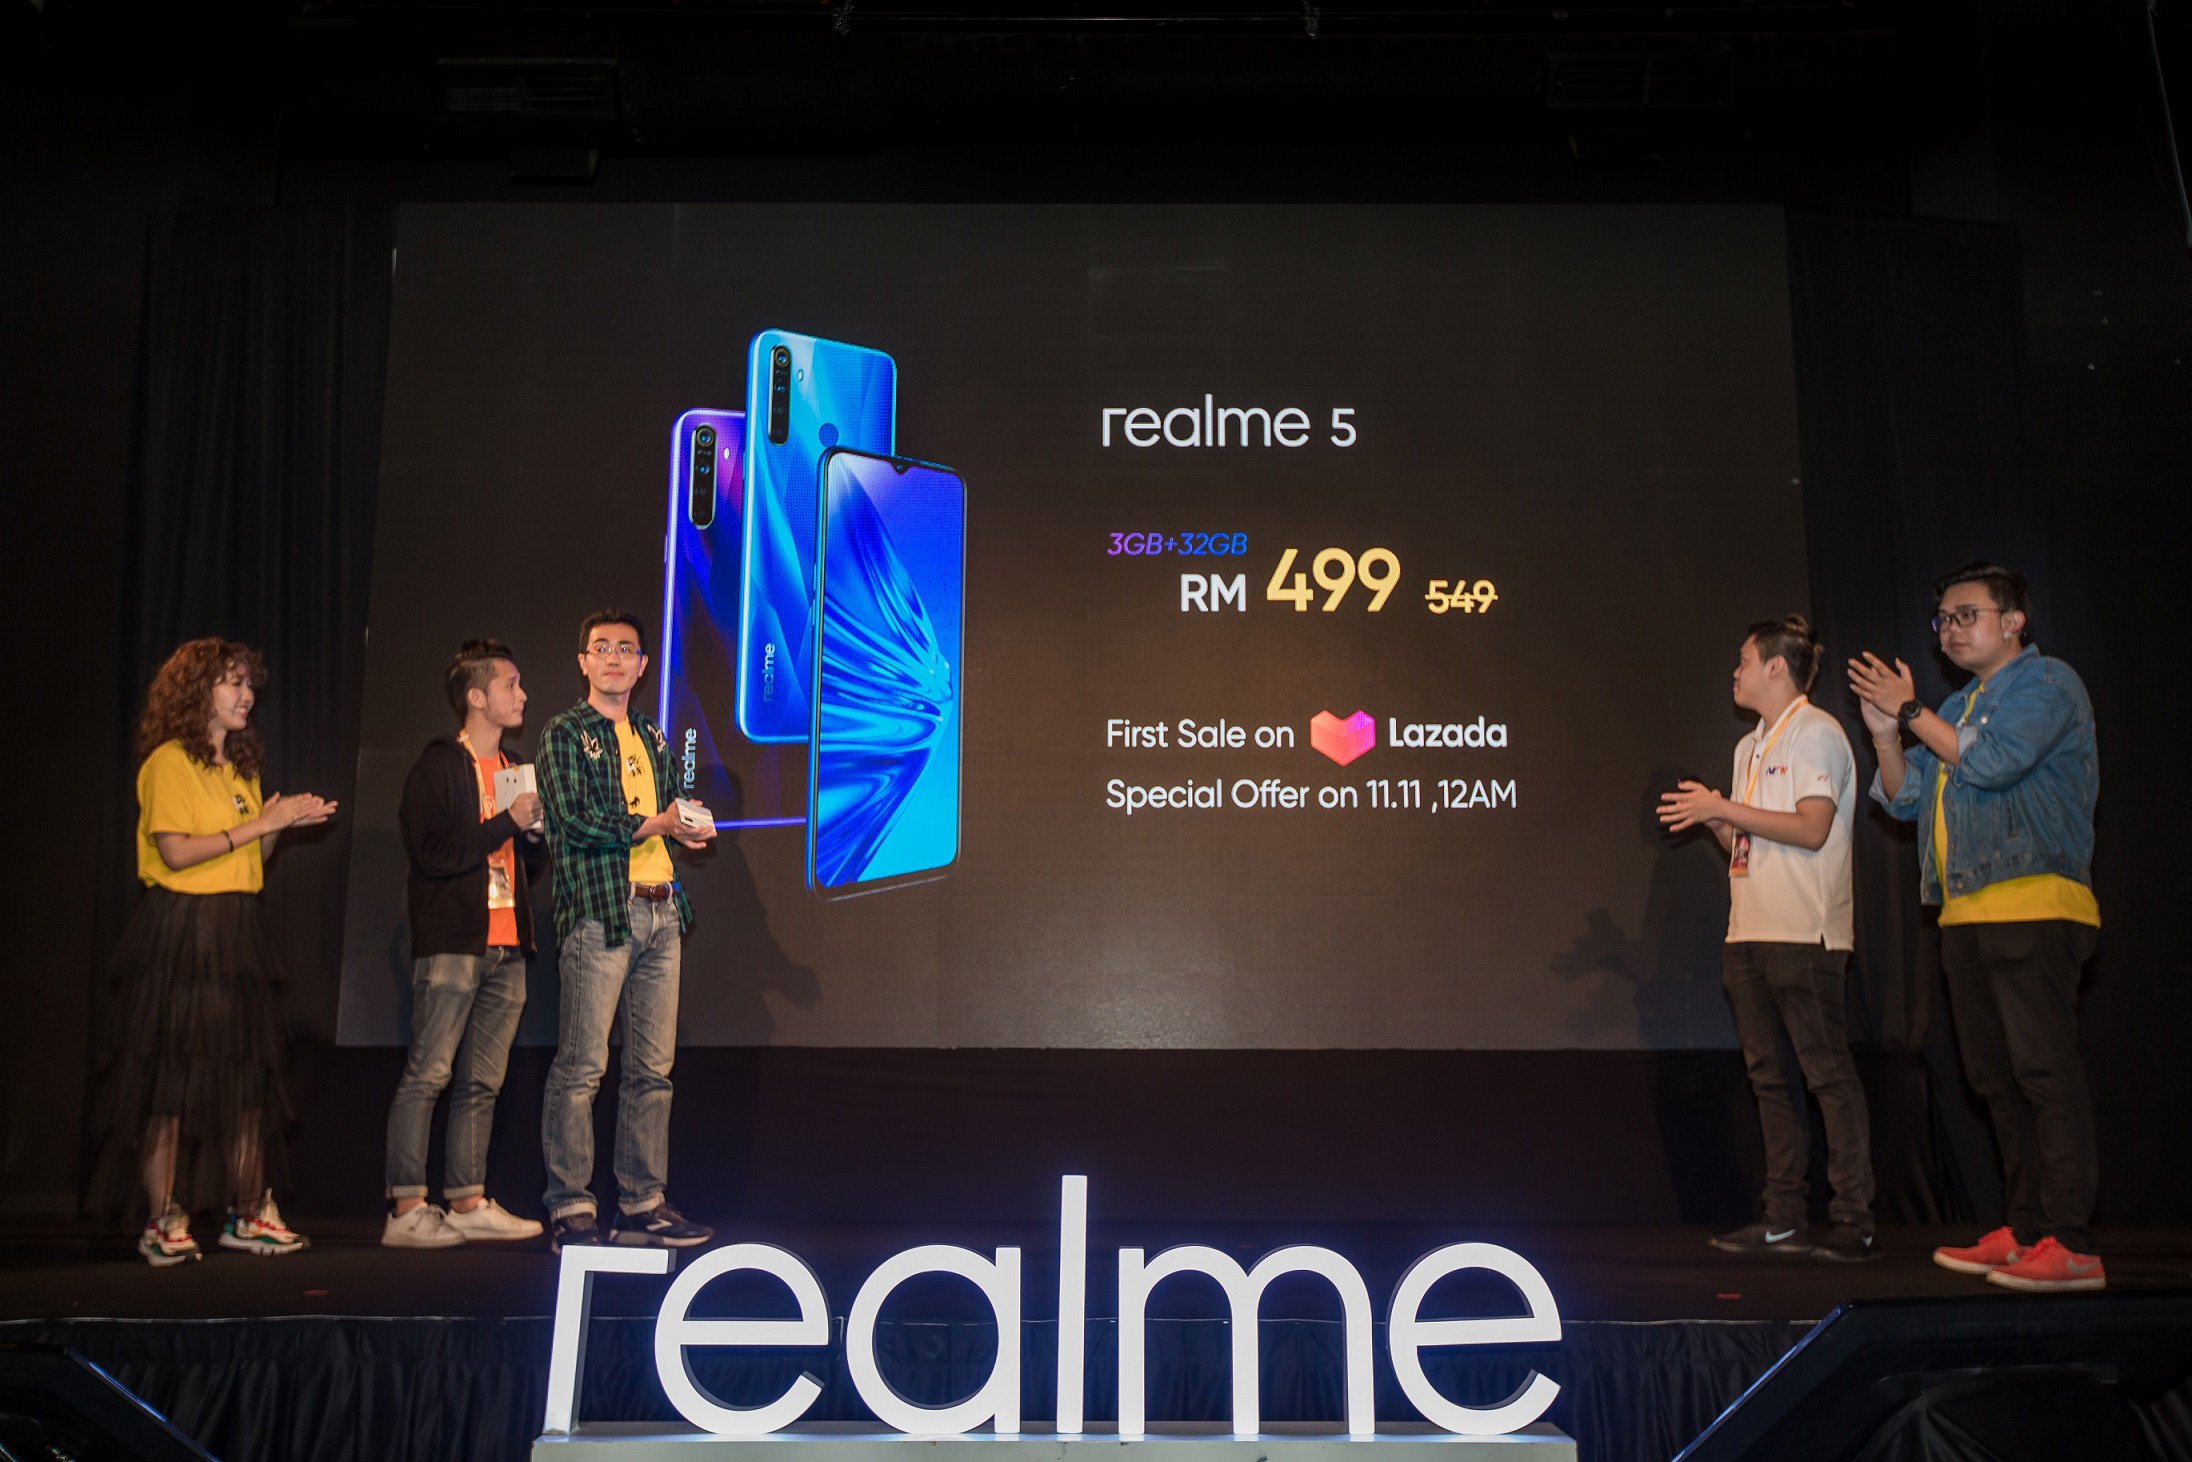 realme 11.11 Lazada Sale Offers Bigger and Better Deals